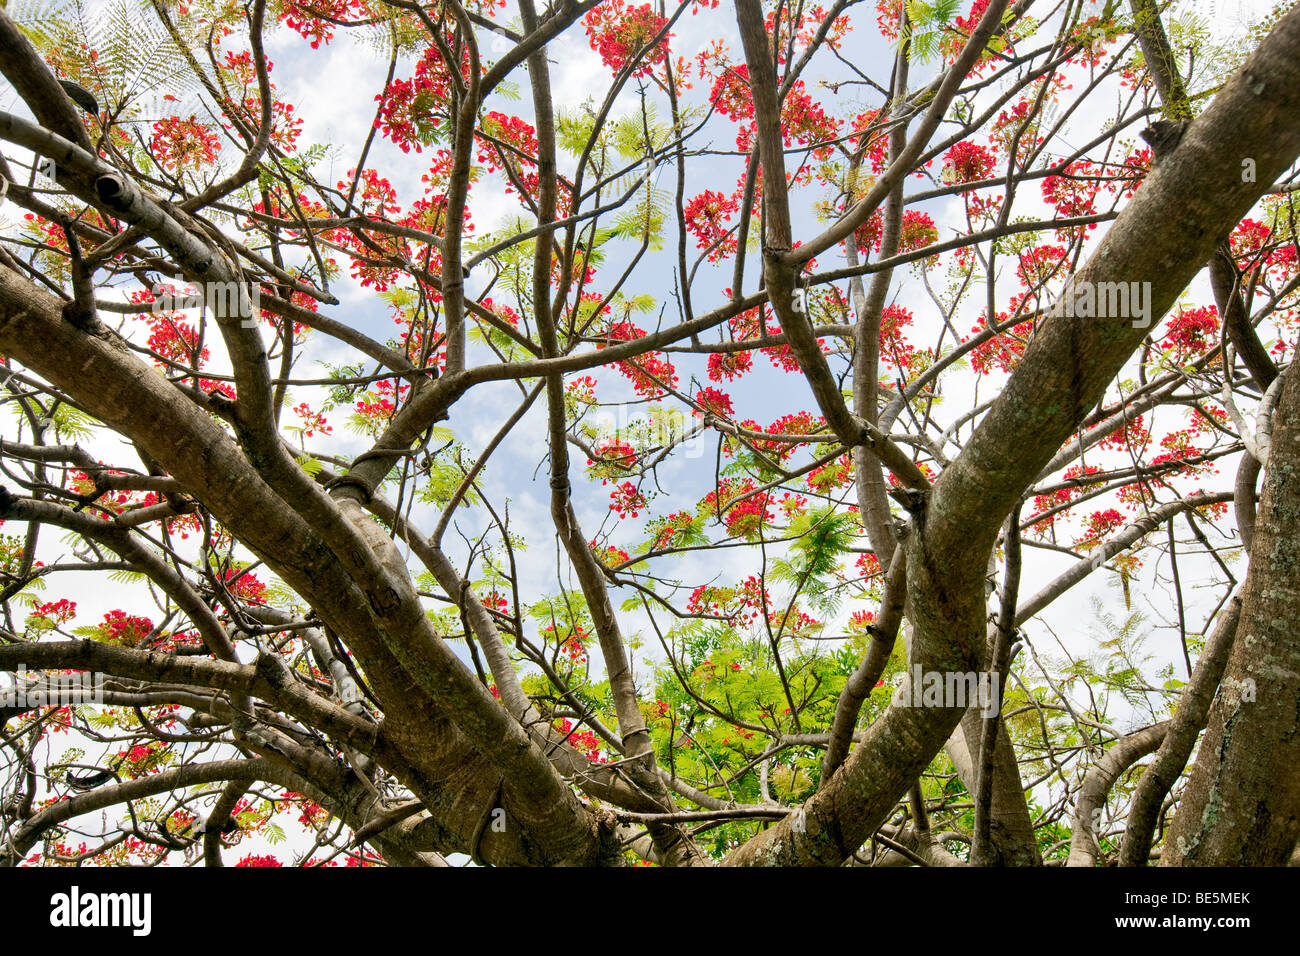 Unidentified tree with red blossoms. Kauai, Hawaii Stock Photo